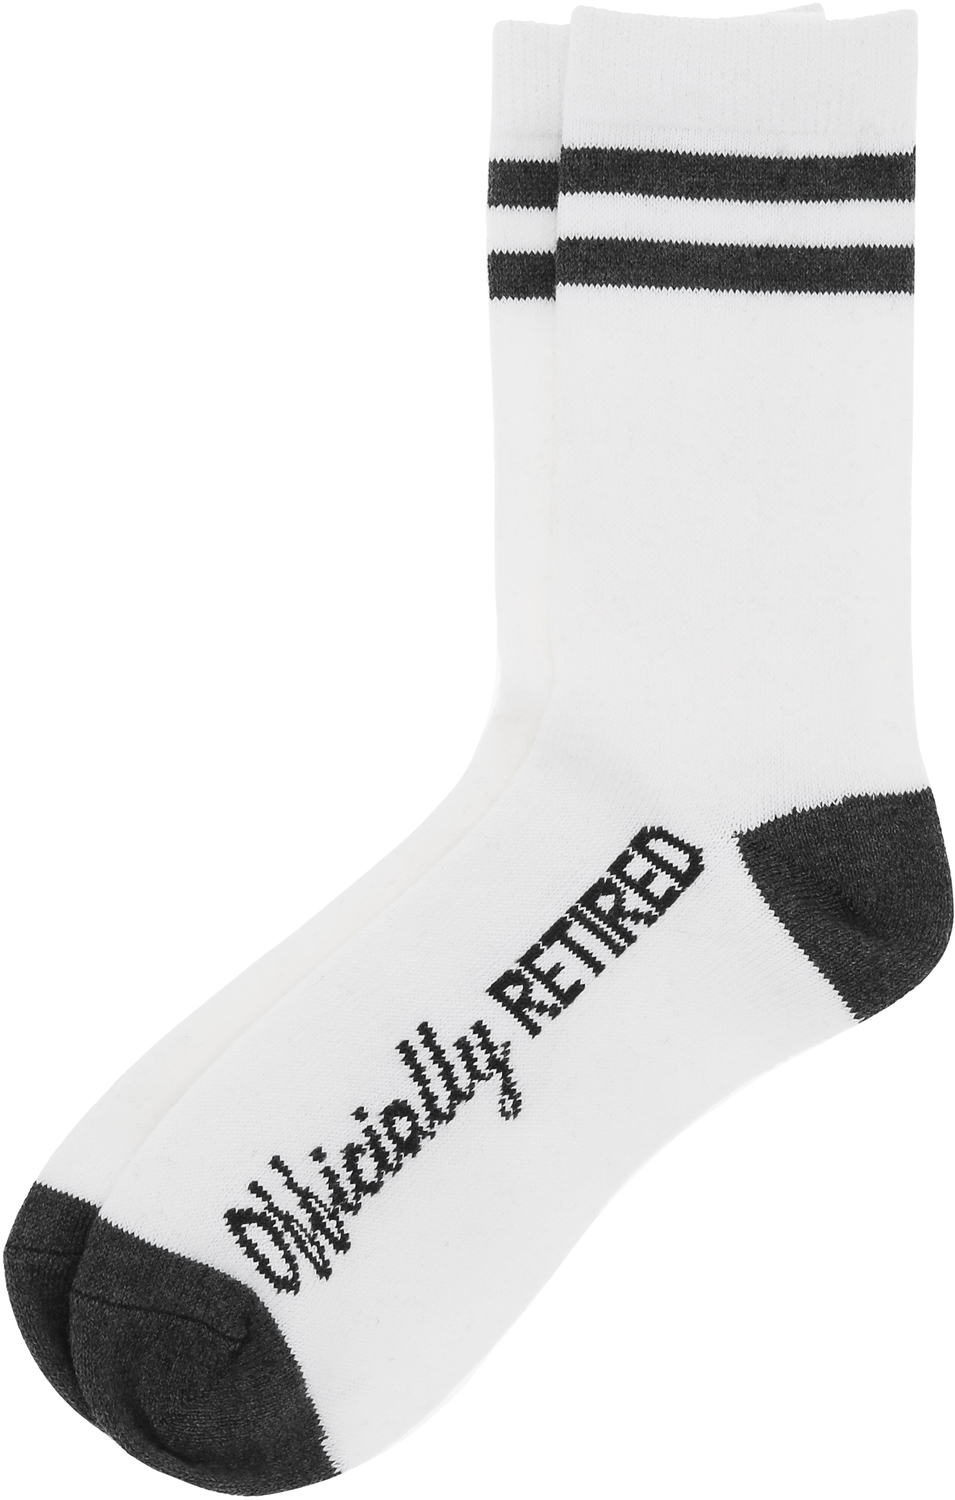 Officially Retired by Retired Life - Officially Retired - S/M Crew Socks